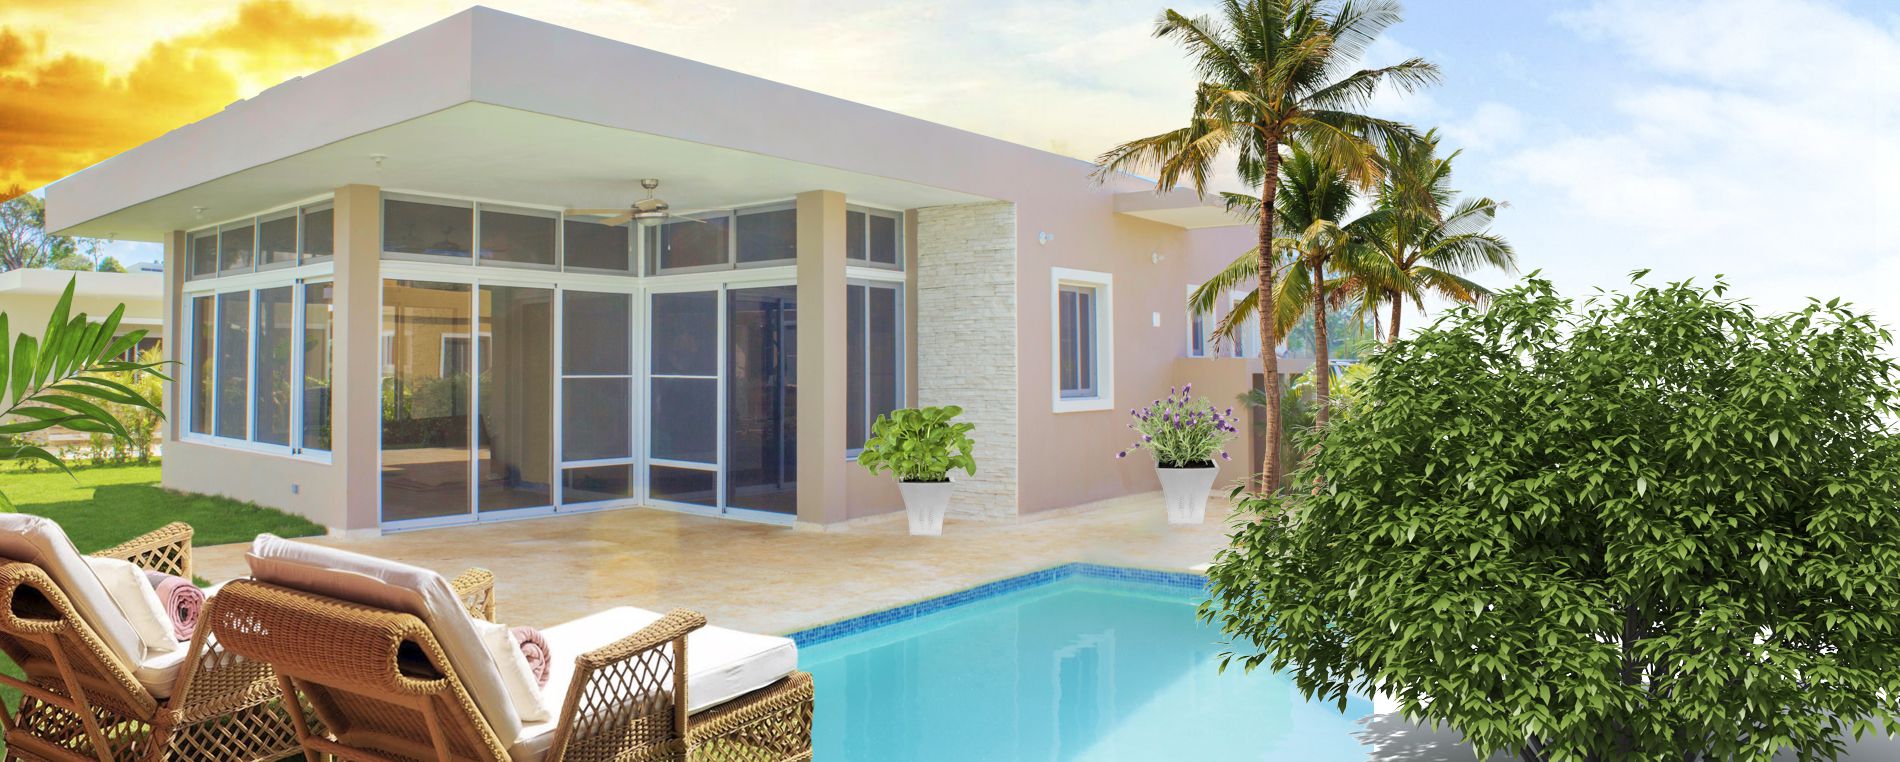 buying a home in the dominican republic